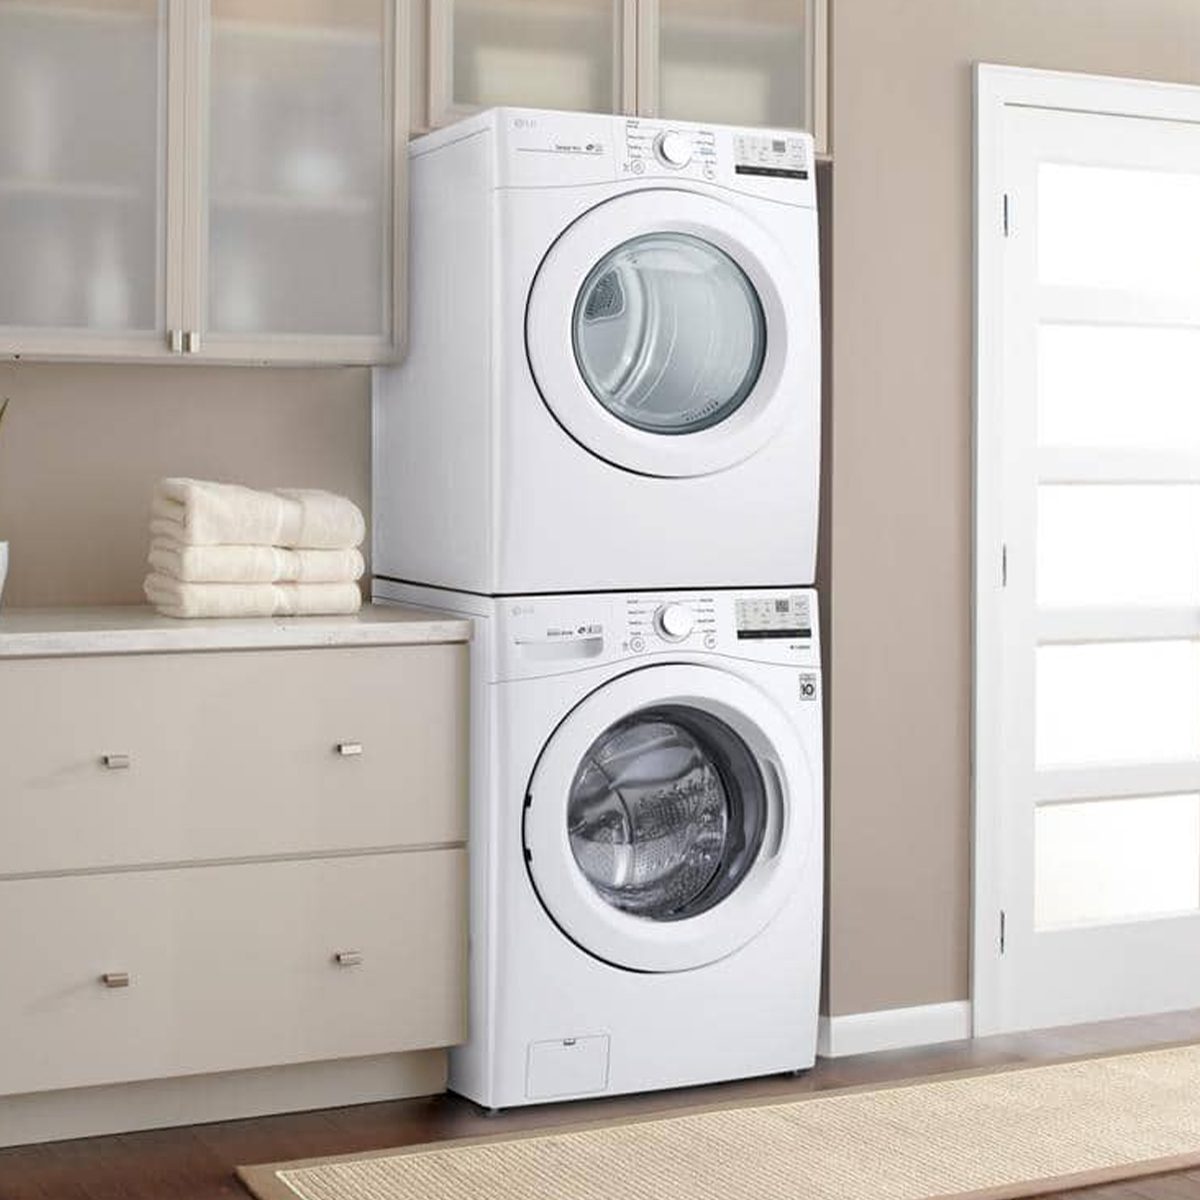 5 Apartment Washer and Dryer Options